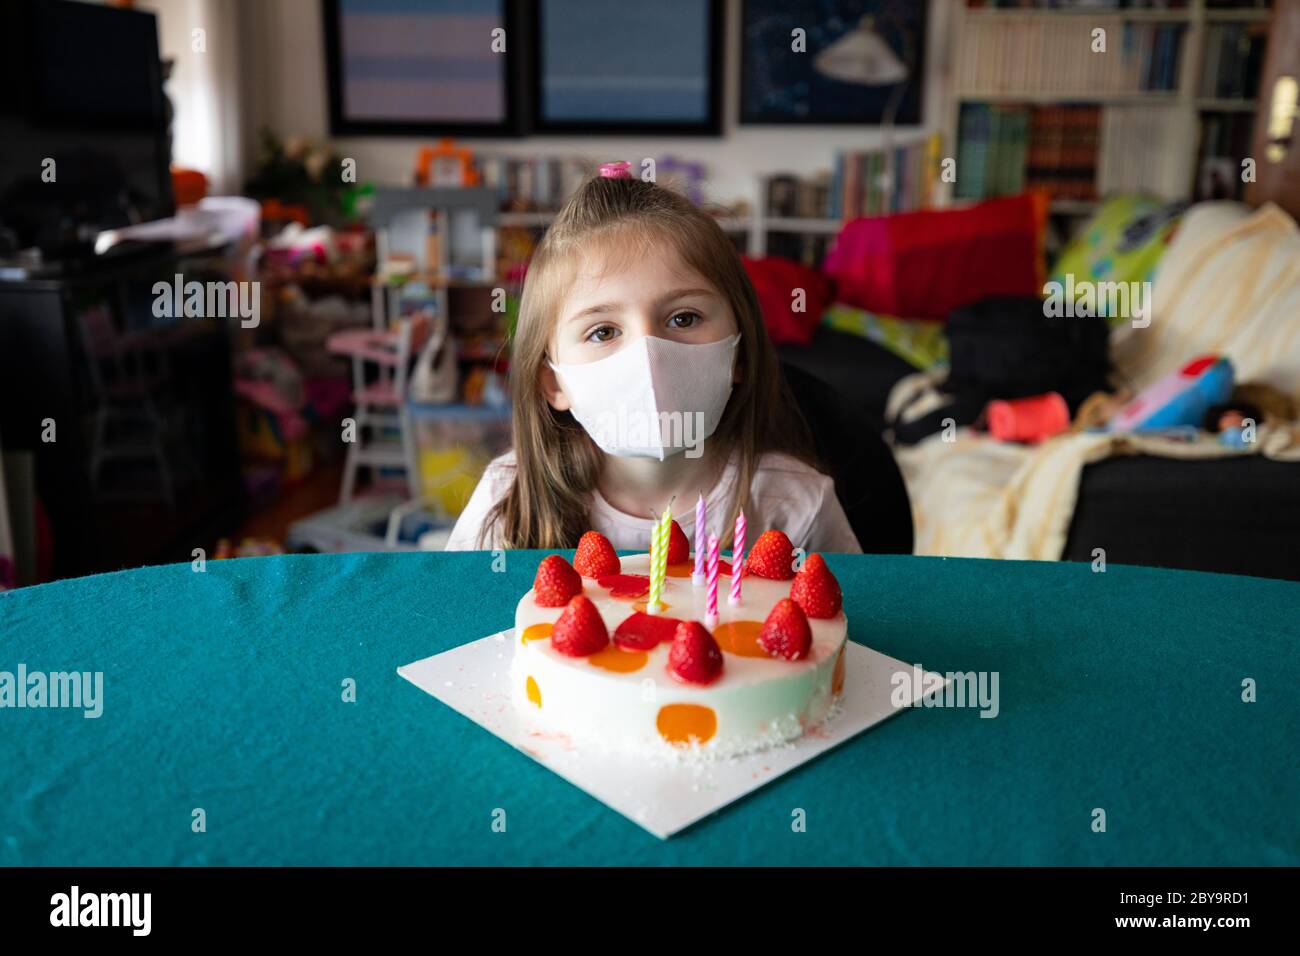 Thoughtful little birthday girl wearing a protective face mask during the coronavirus or Covid-19 pandemic sitting at table celebrating at home with a Stock Photo